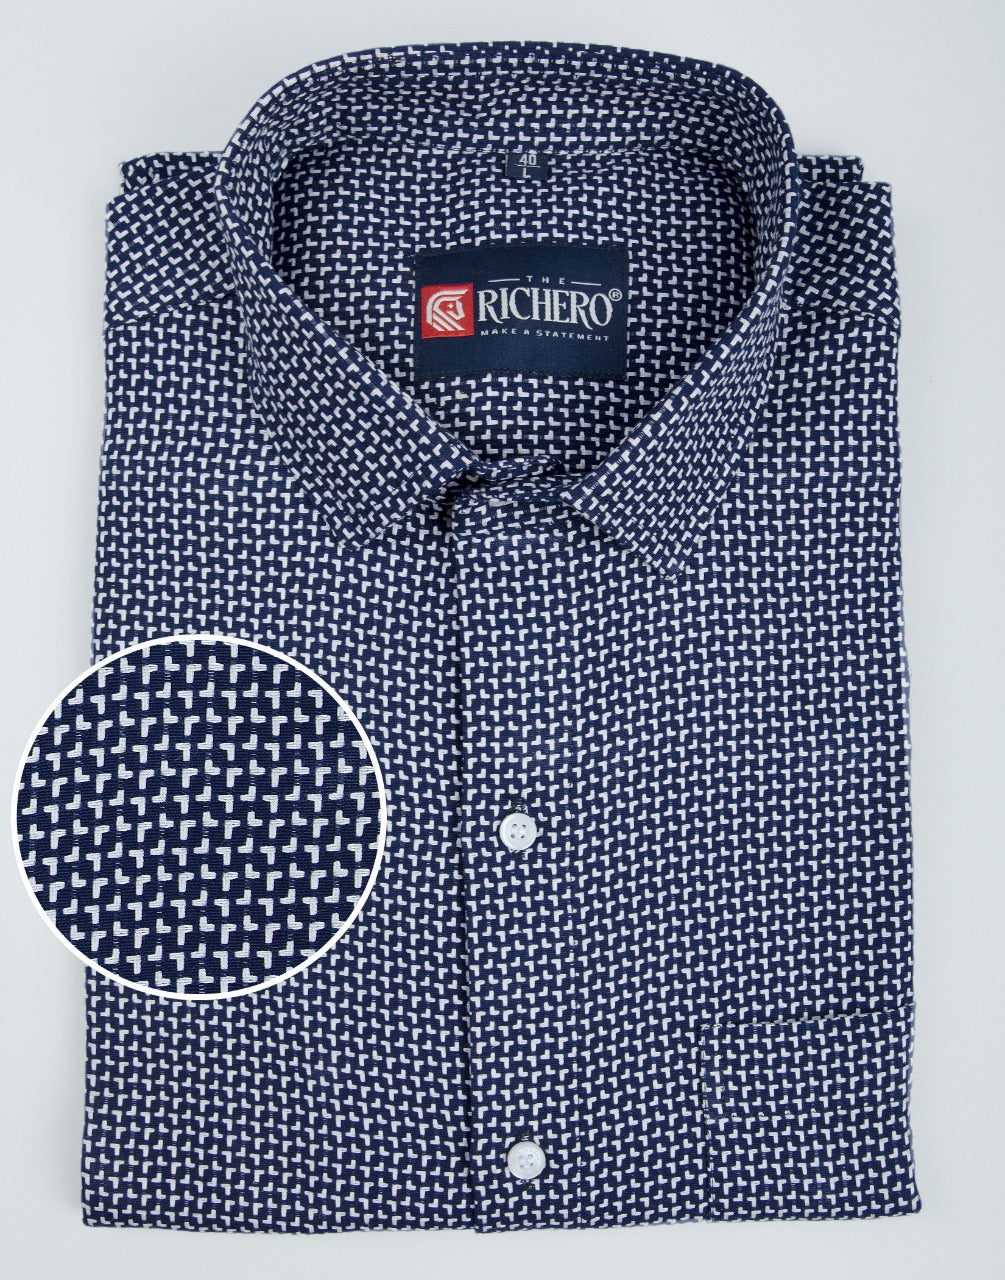 Navy blue & white line casual shirt